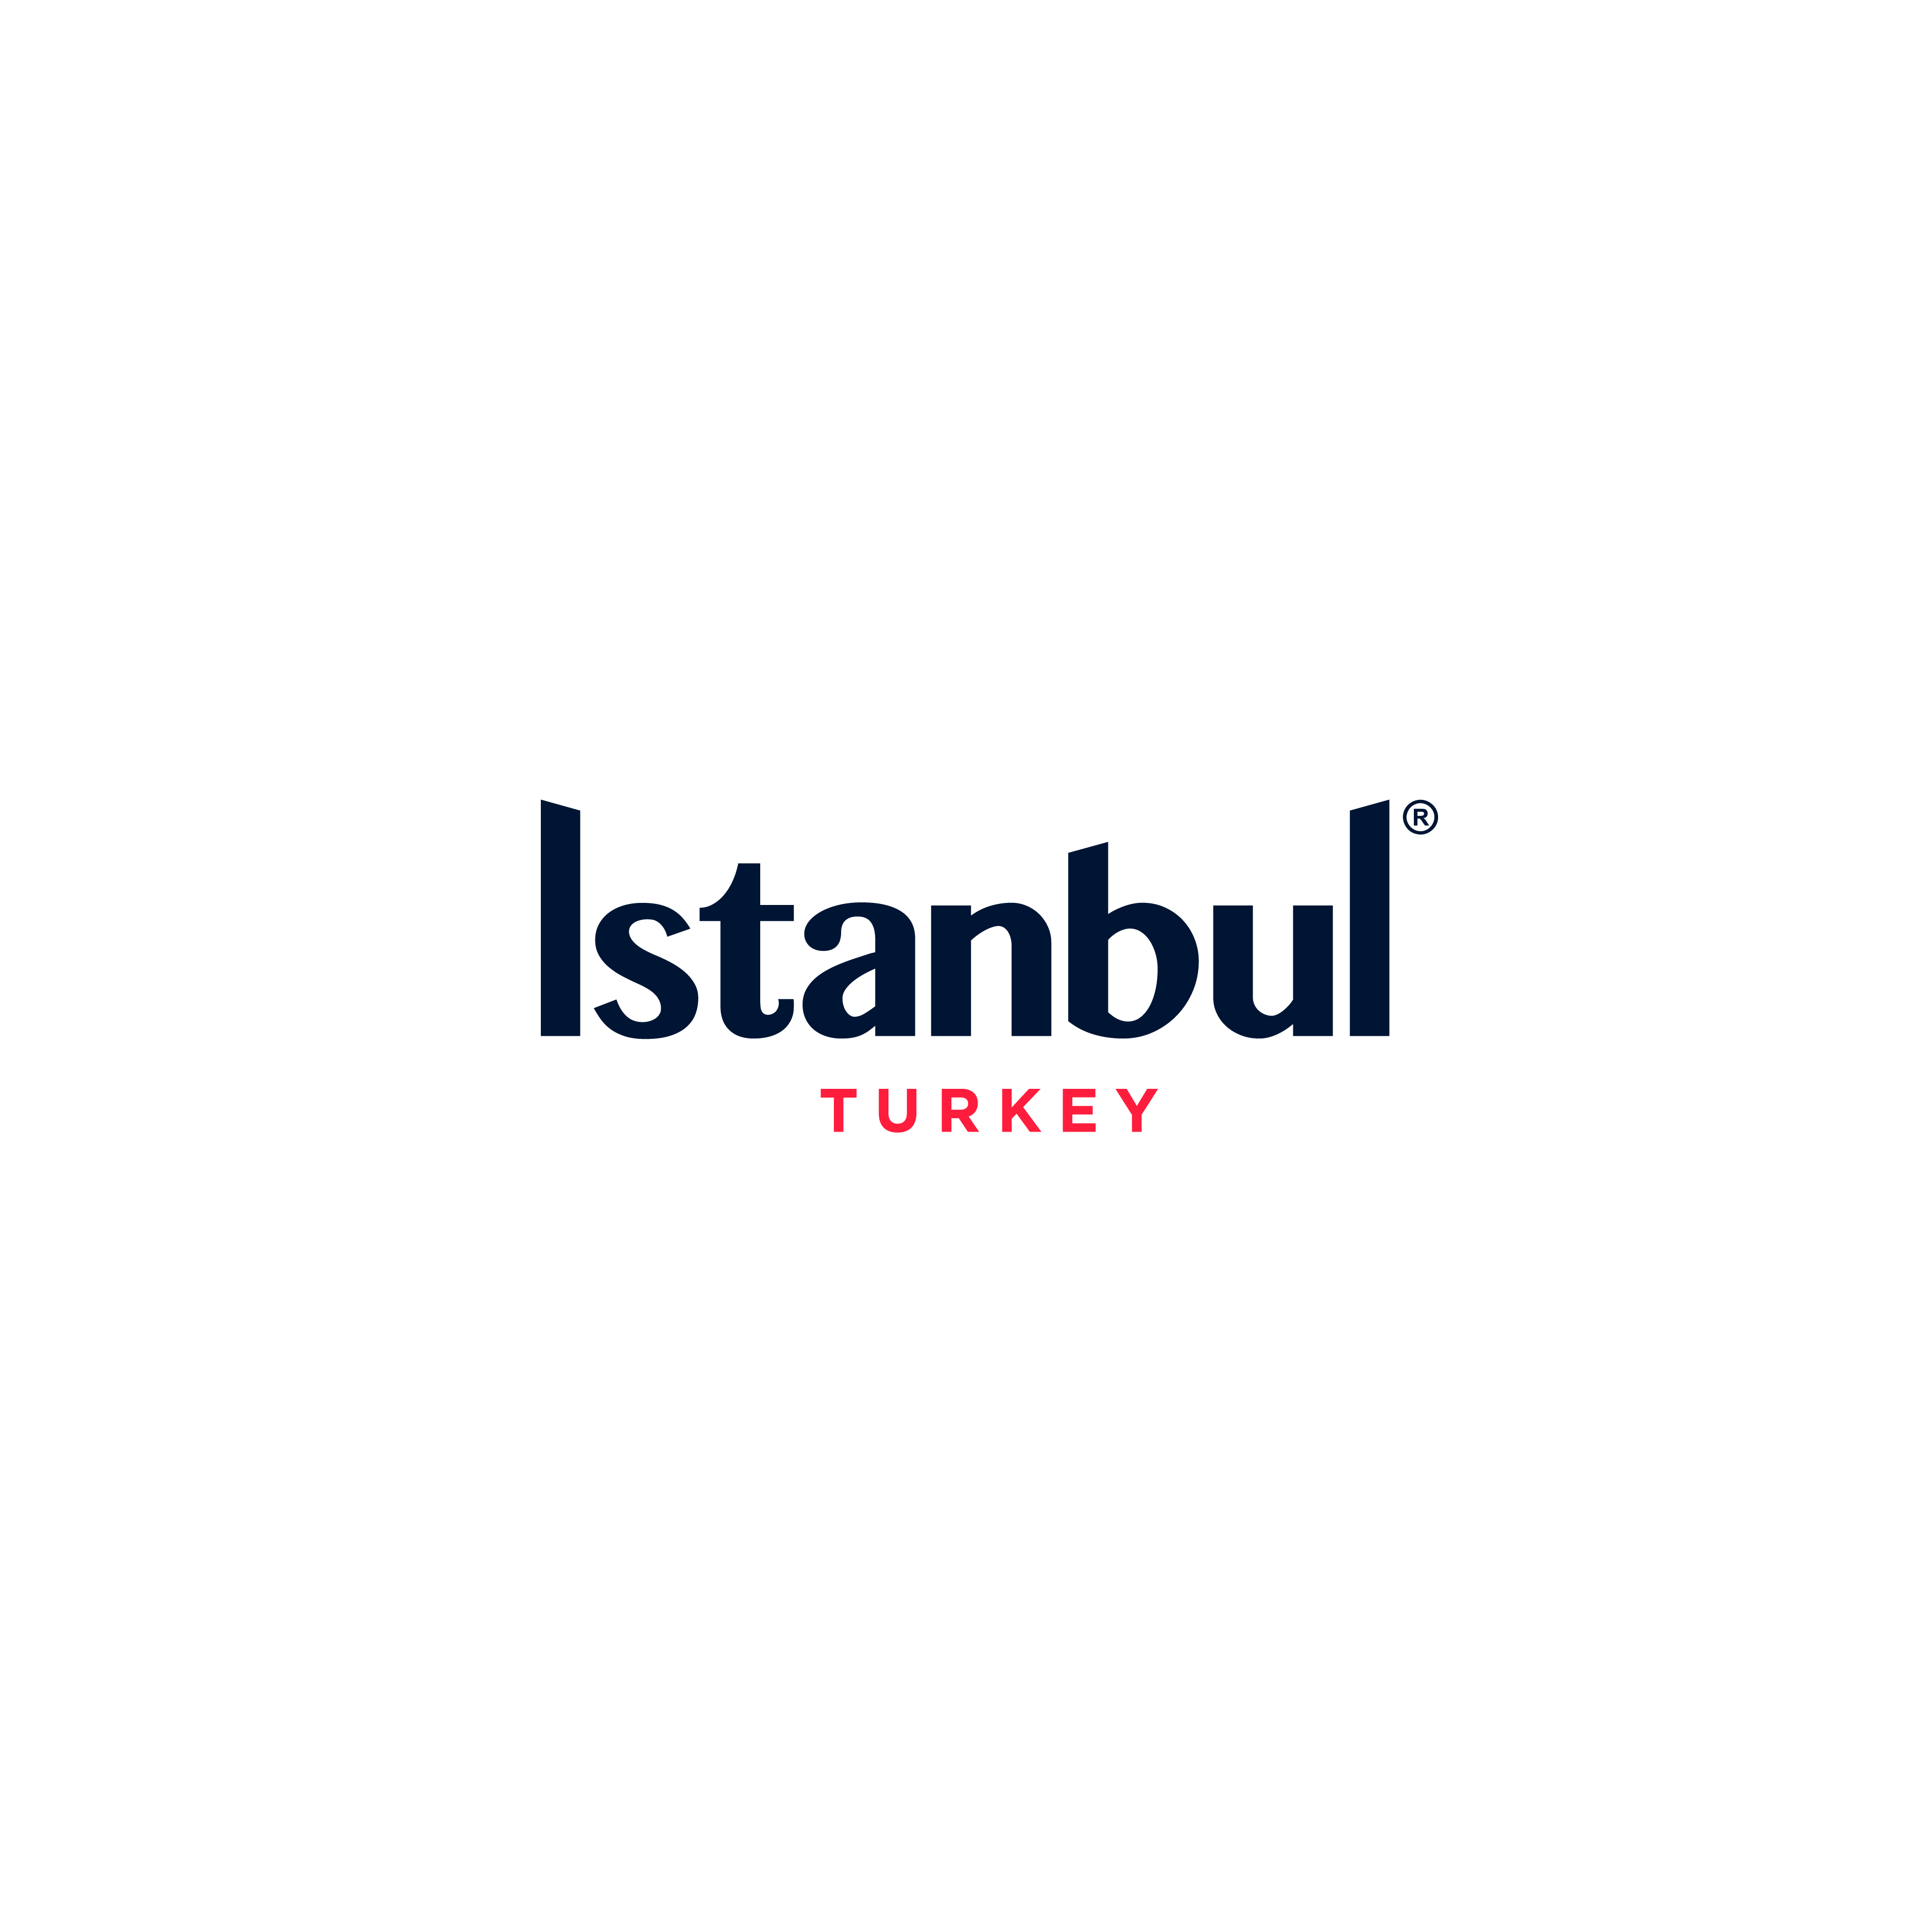 Istanbul logo design by logo designer Nijaz Muratovic for your inspiration and for the worlds largest logo competition